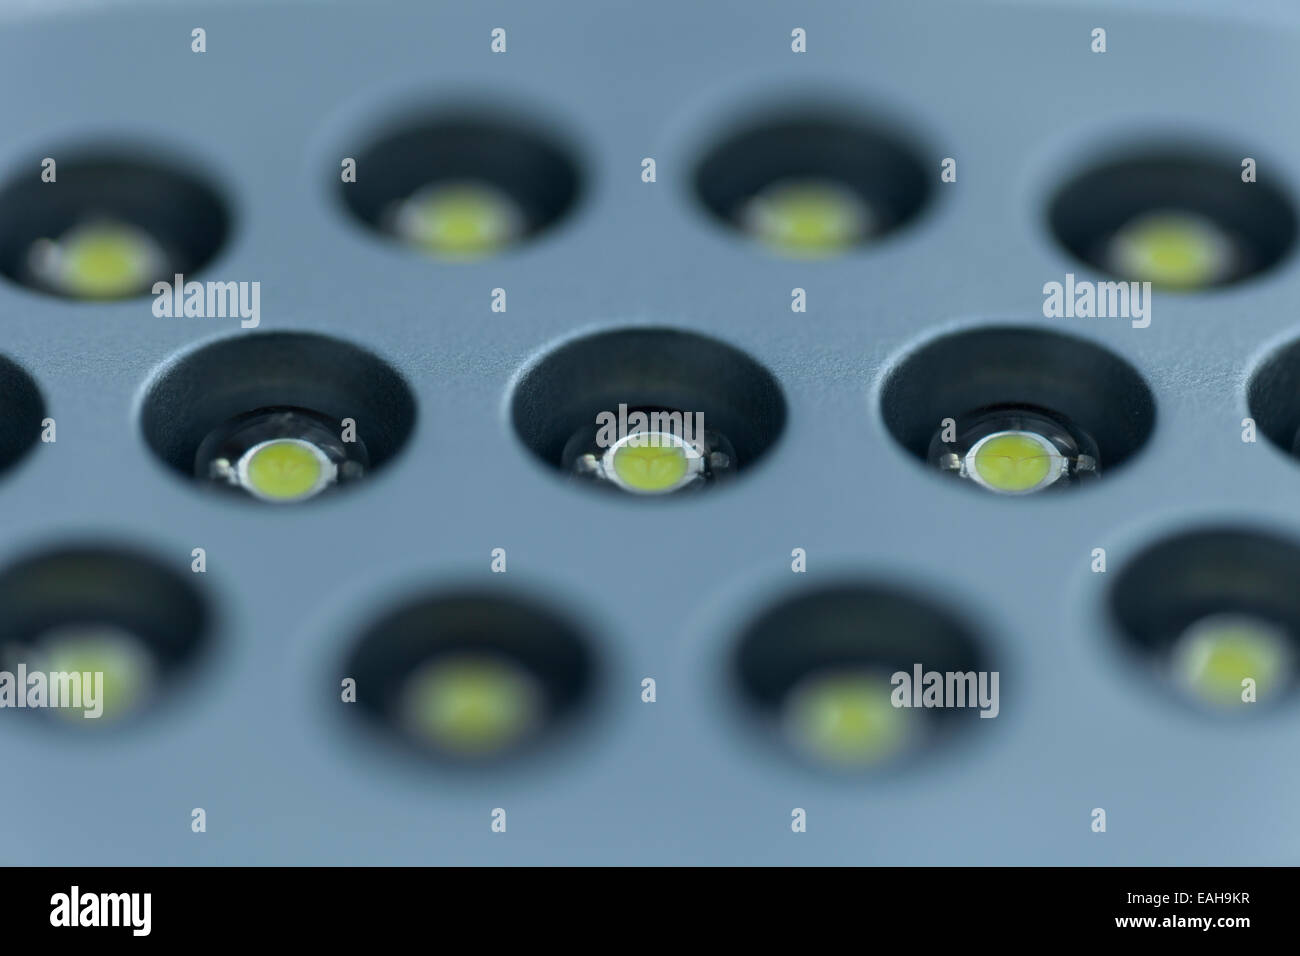 LEDs (SMD type) and their yellow phosphor covers in an LED desk lamp Stock Photo